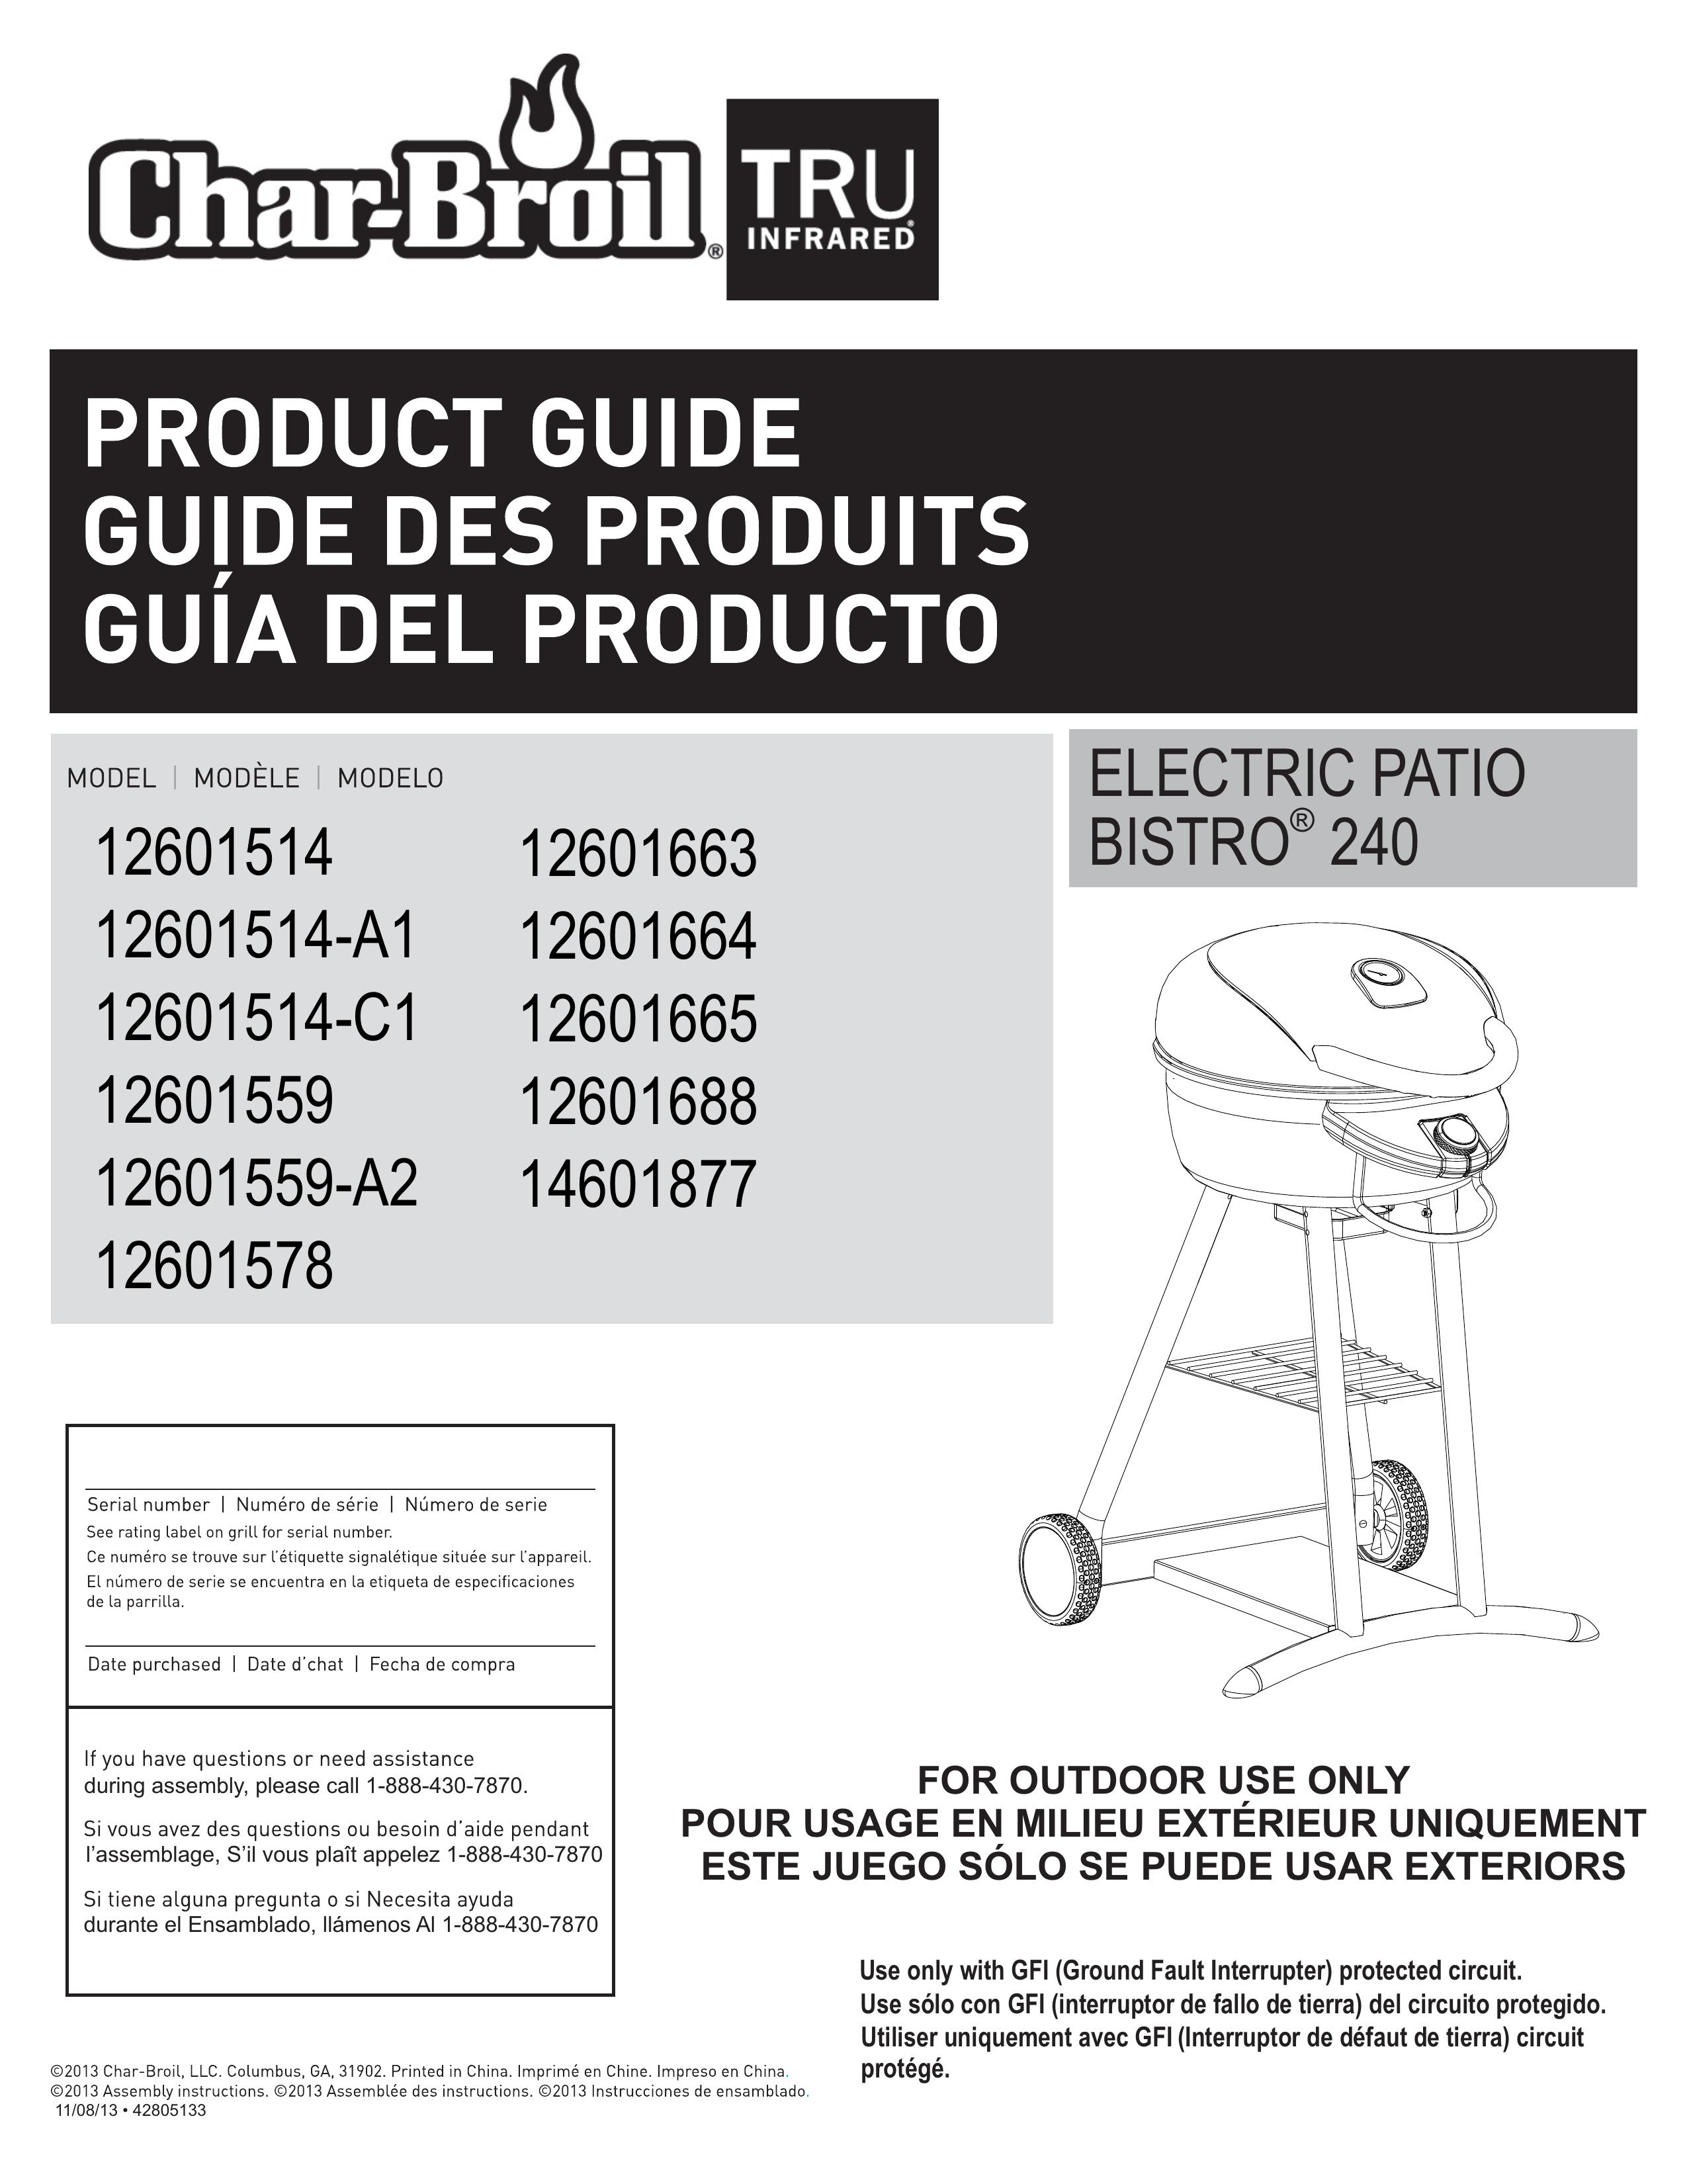 Char-Broil 12601514-A1 Electric Grill User Manual (Page 1)